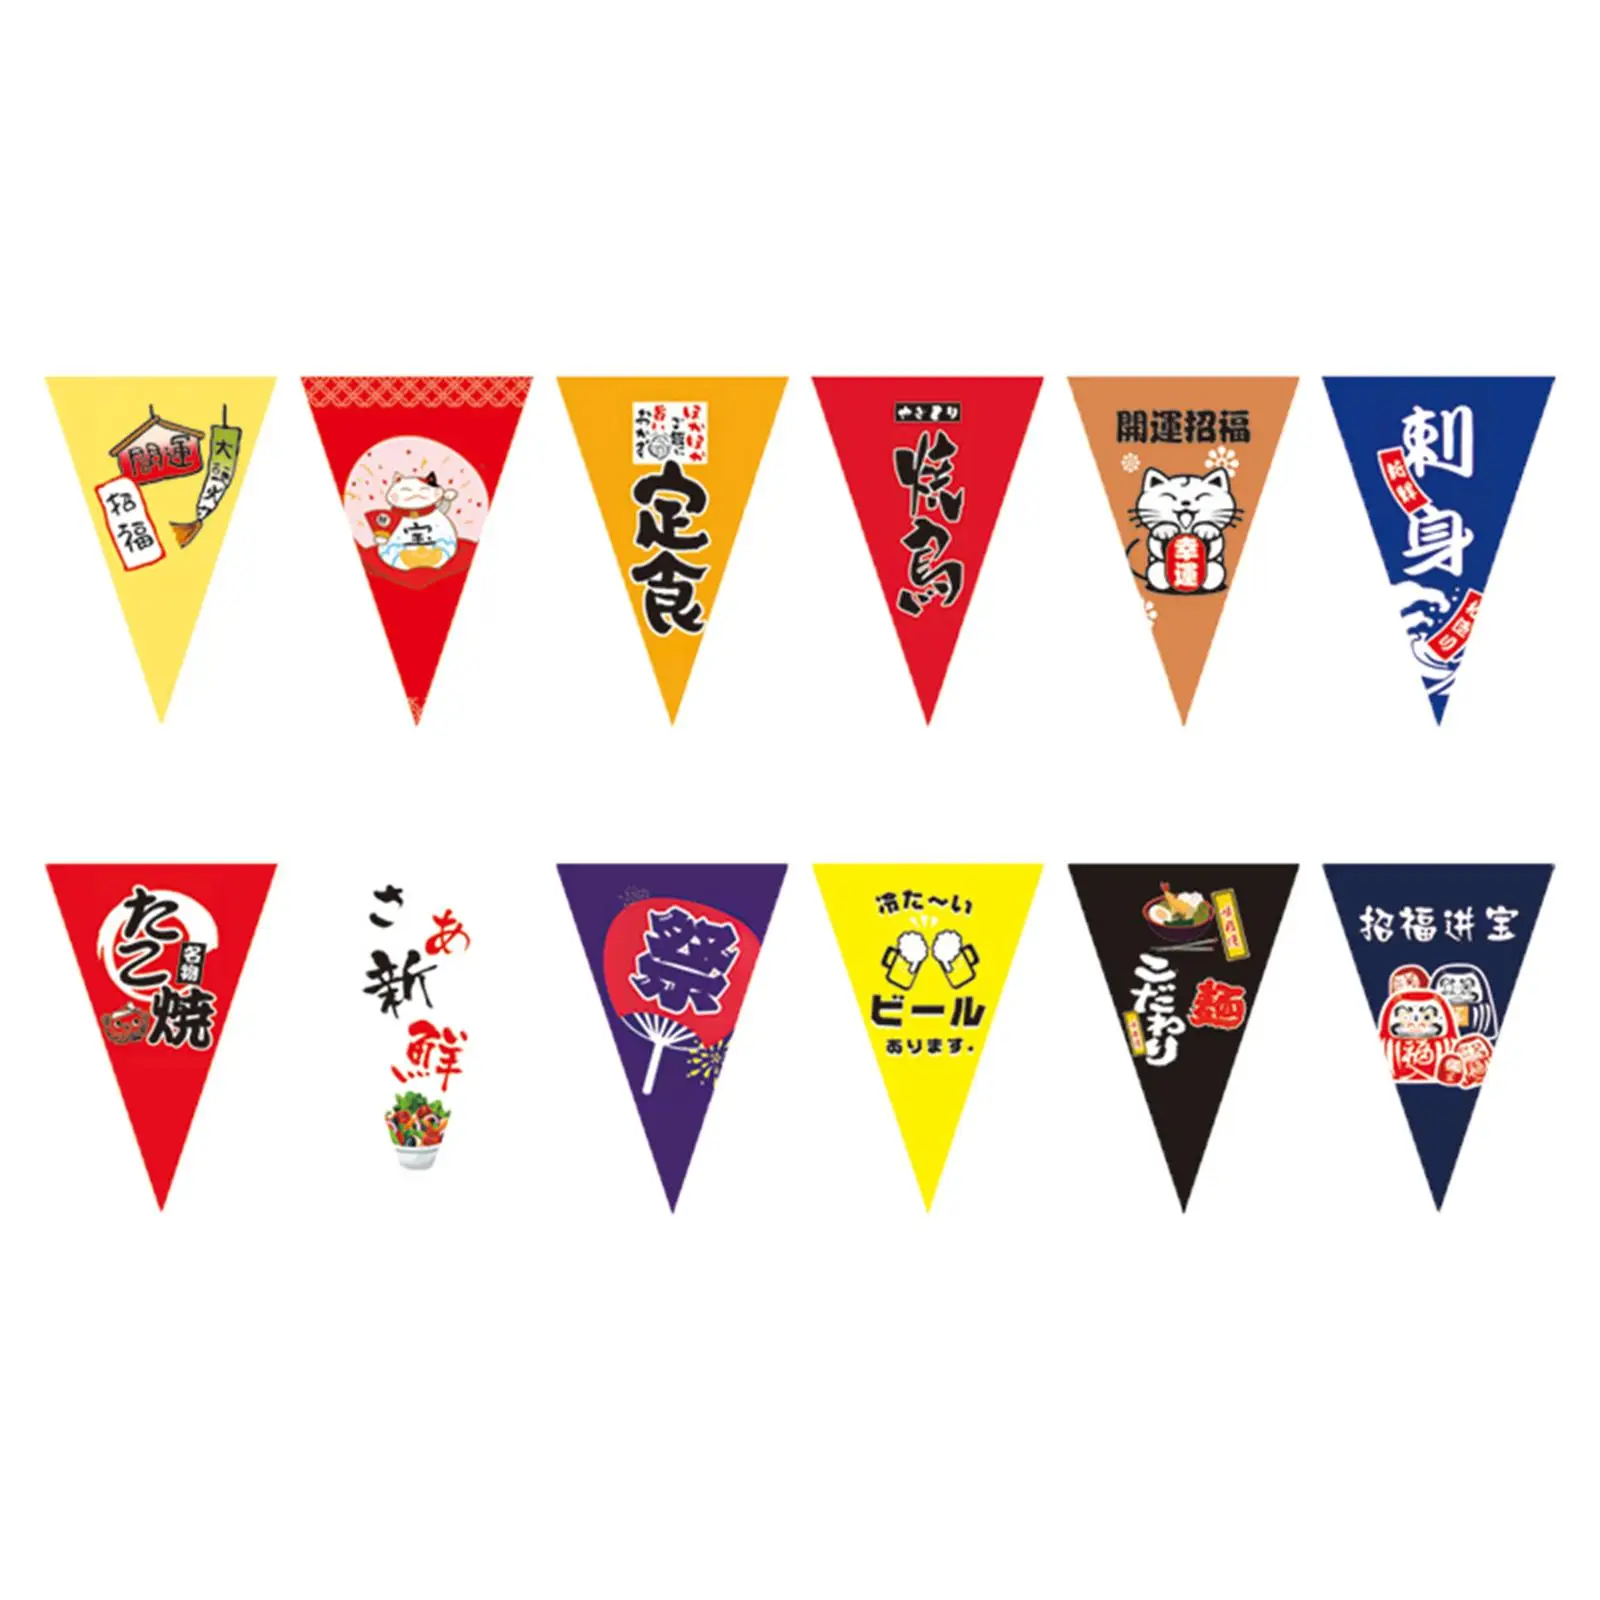 24 Flags Sushi Banner Triangle Flag Bunting for Festival Restaurant Sushi